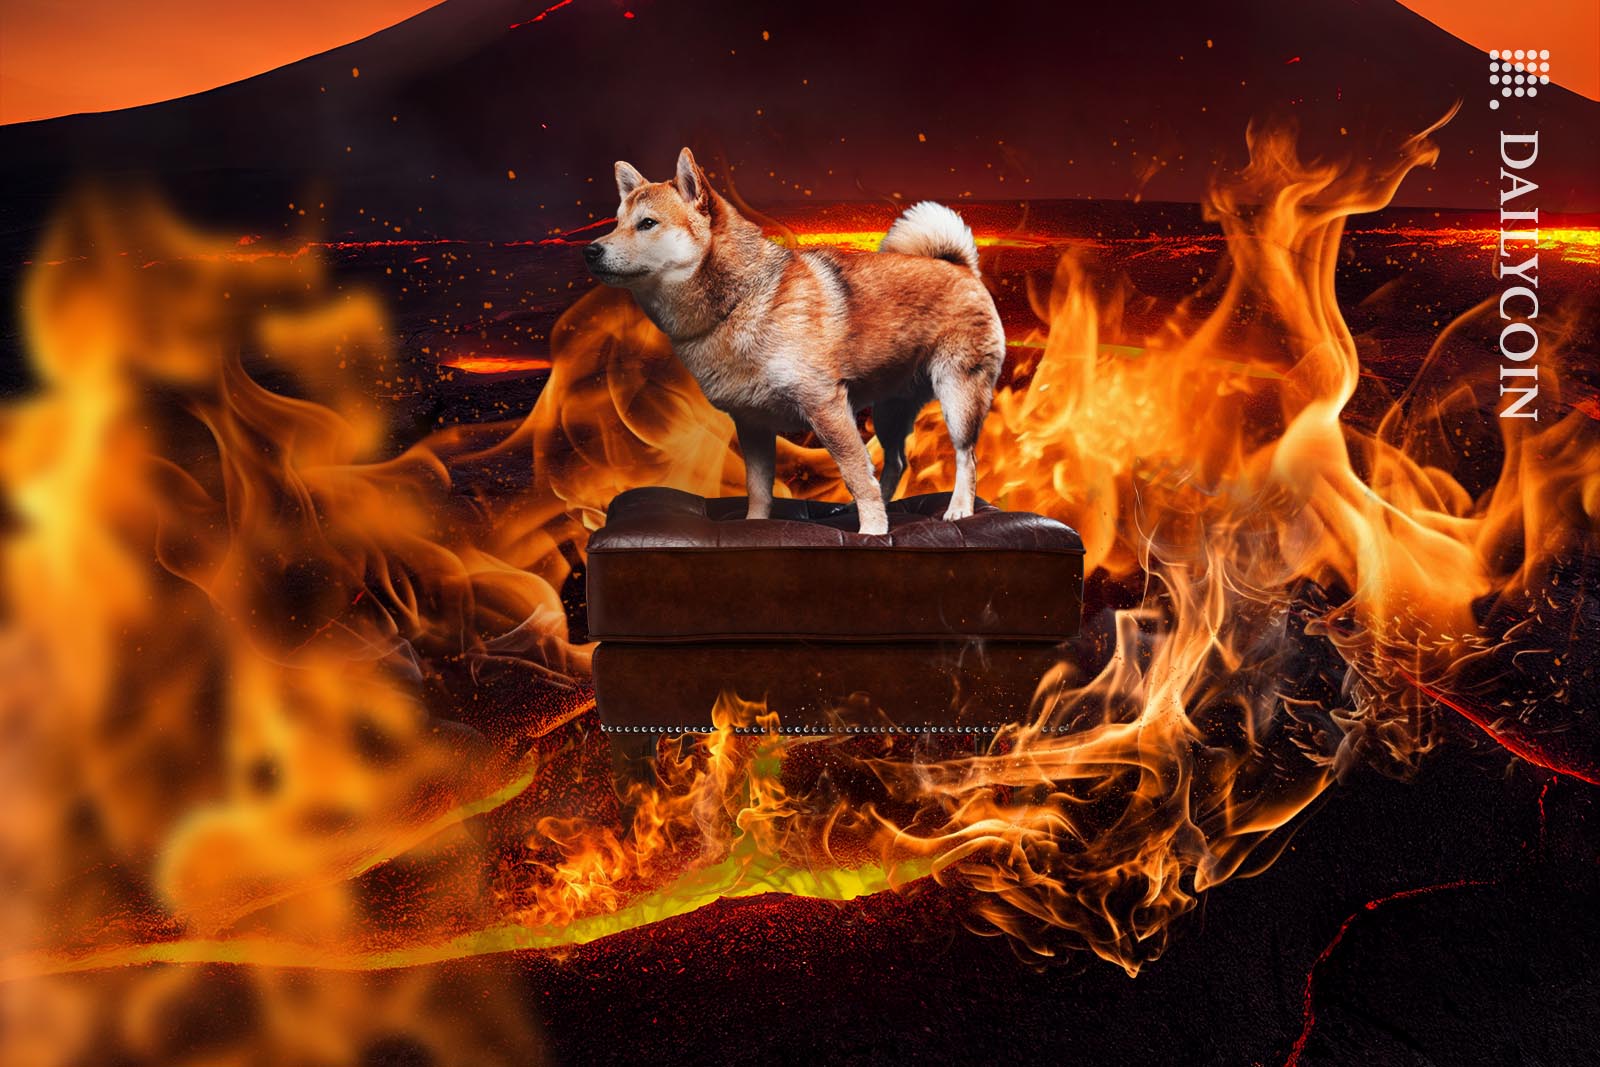 Shiba inu standing on a leather ottoman surrounded by fire.